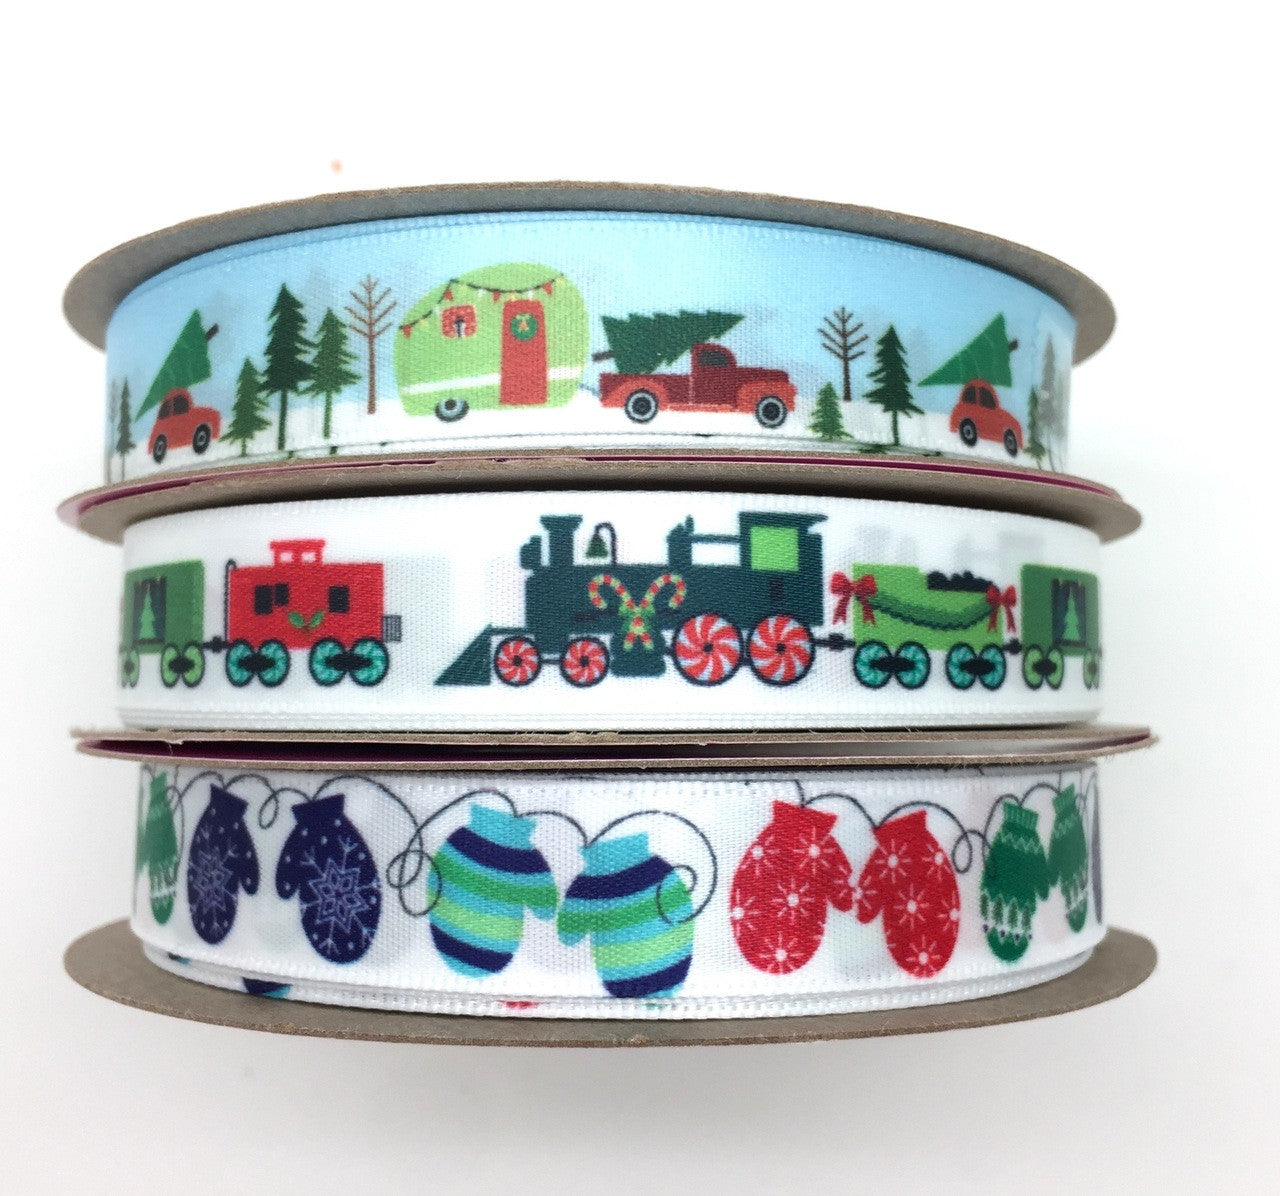 Mixing and matching our fun Winter designs makes for beautifully coordinated gifts beneath the tree!